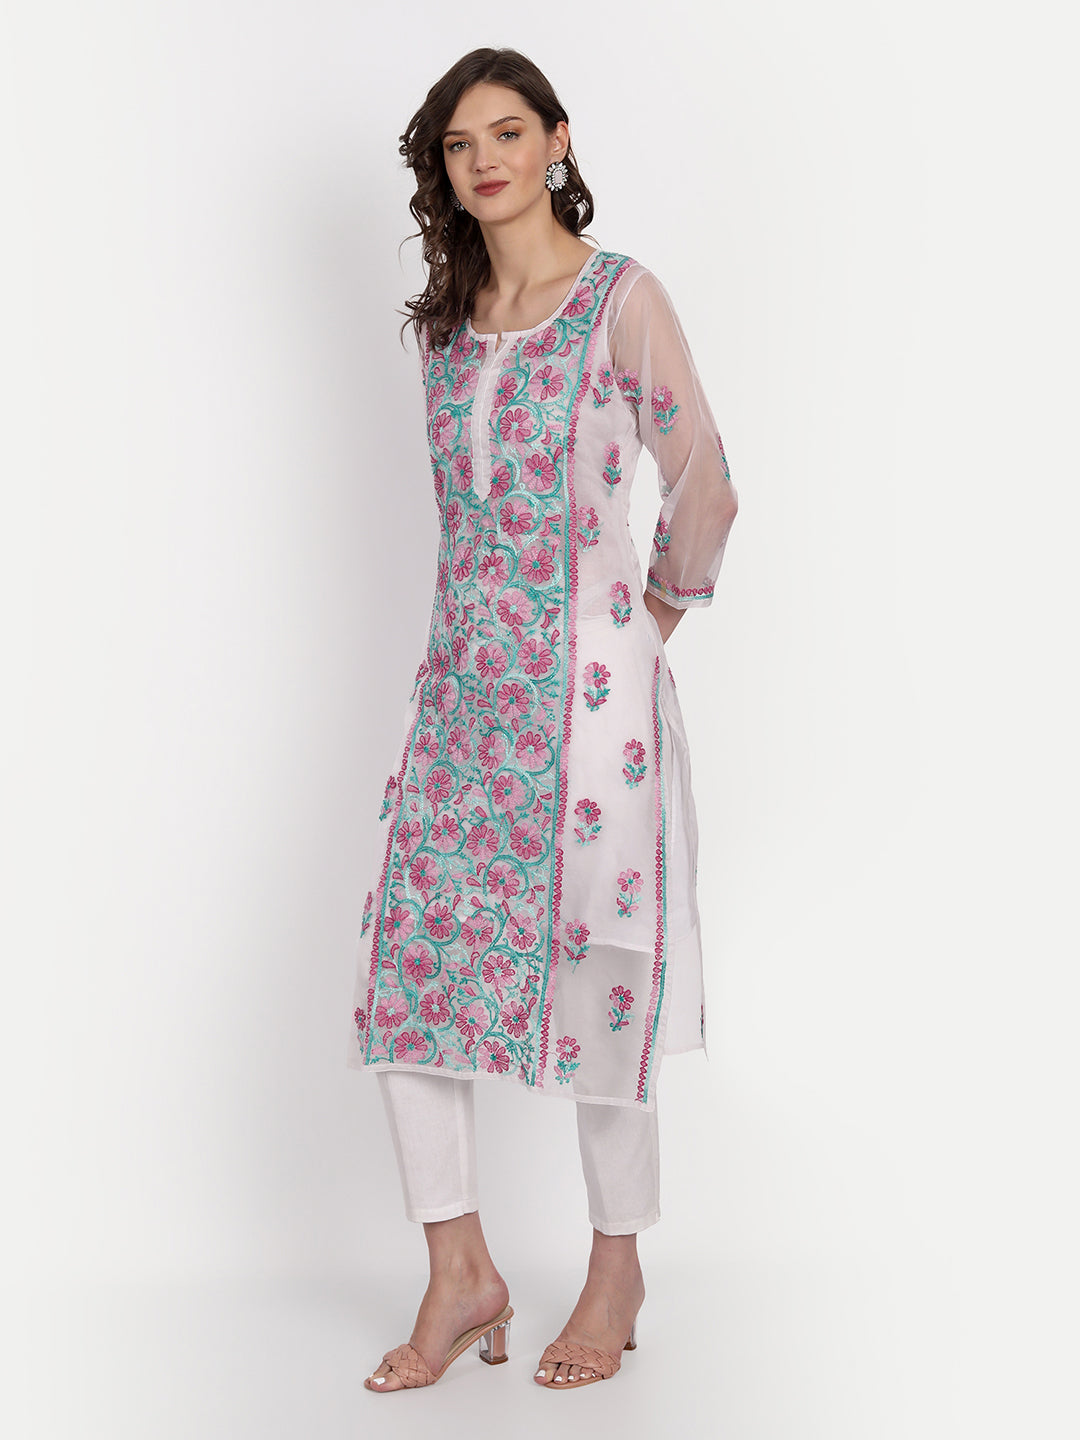 Hand Embroidered Lucknow Chikankari Cotton Kurti at Rs.1250/Piece in  lucknow offer by Mangalam Chikan